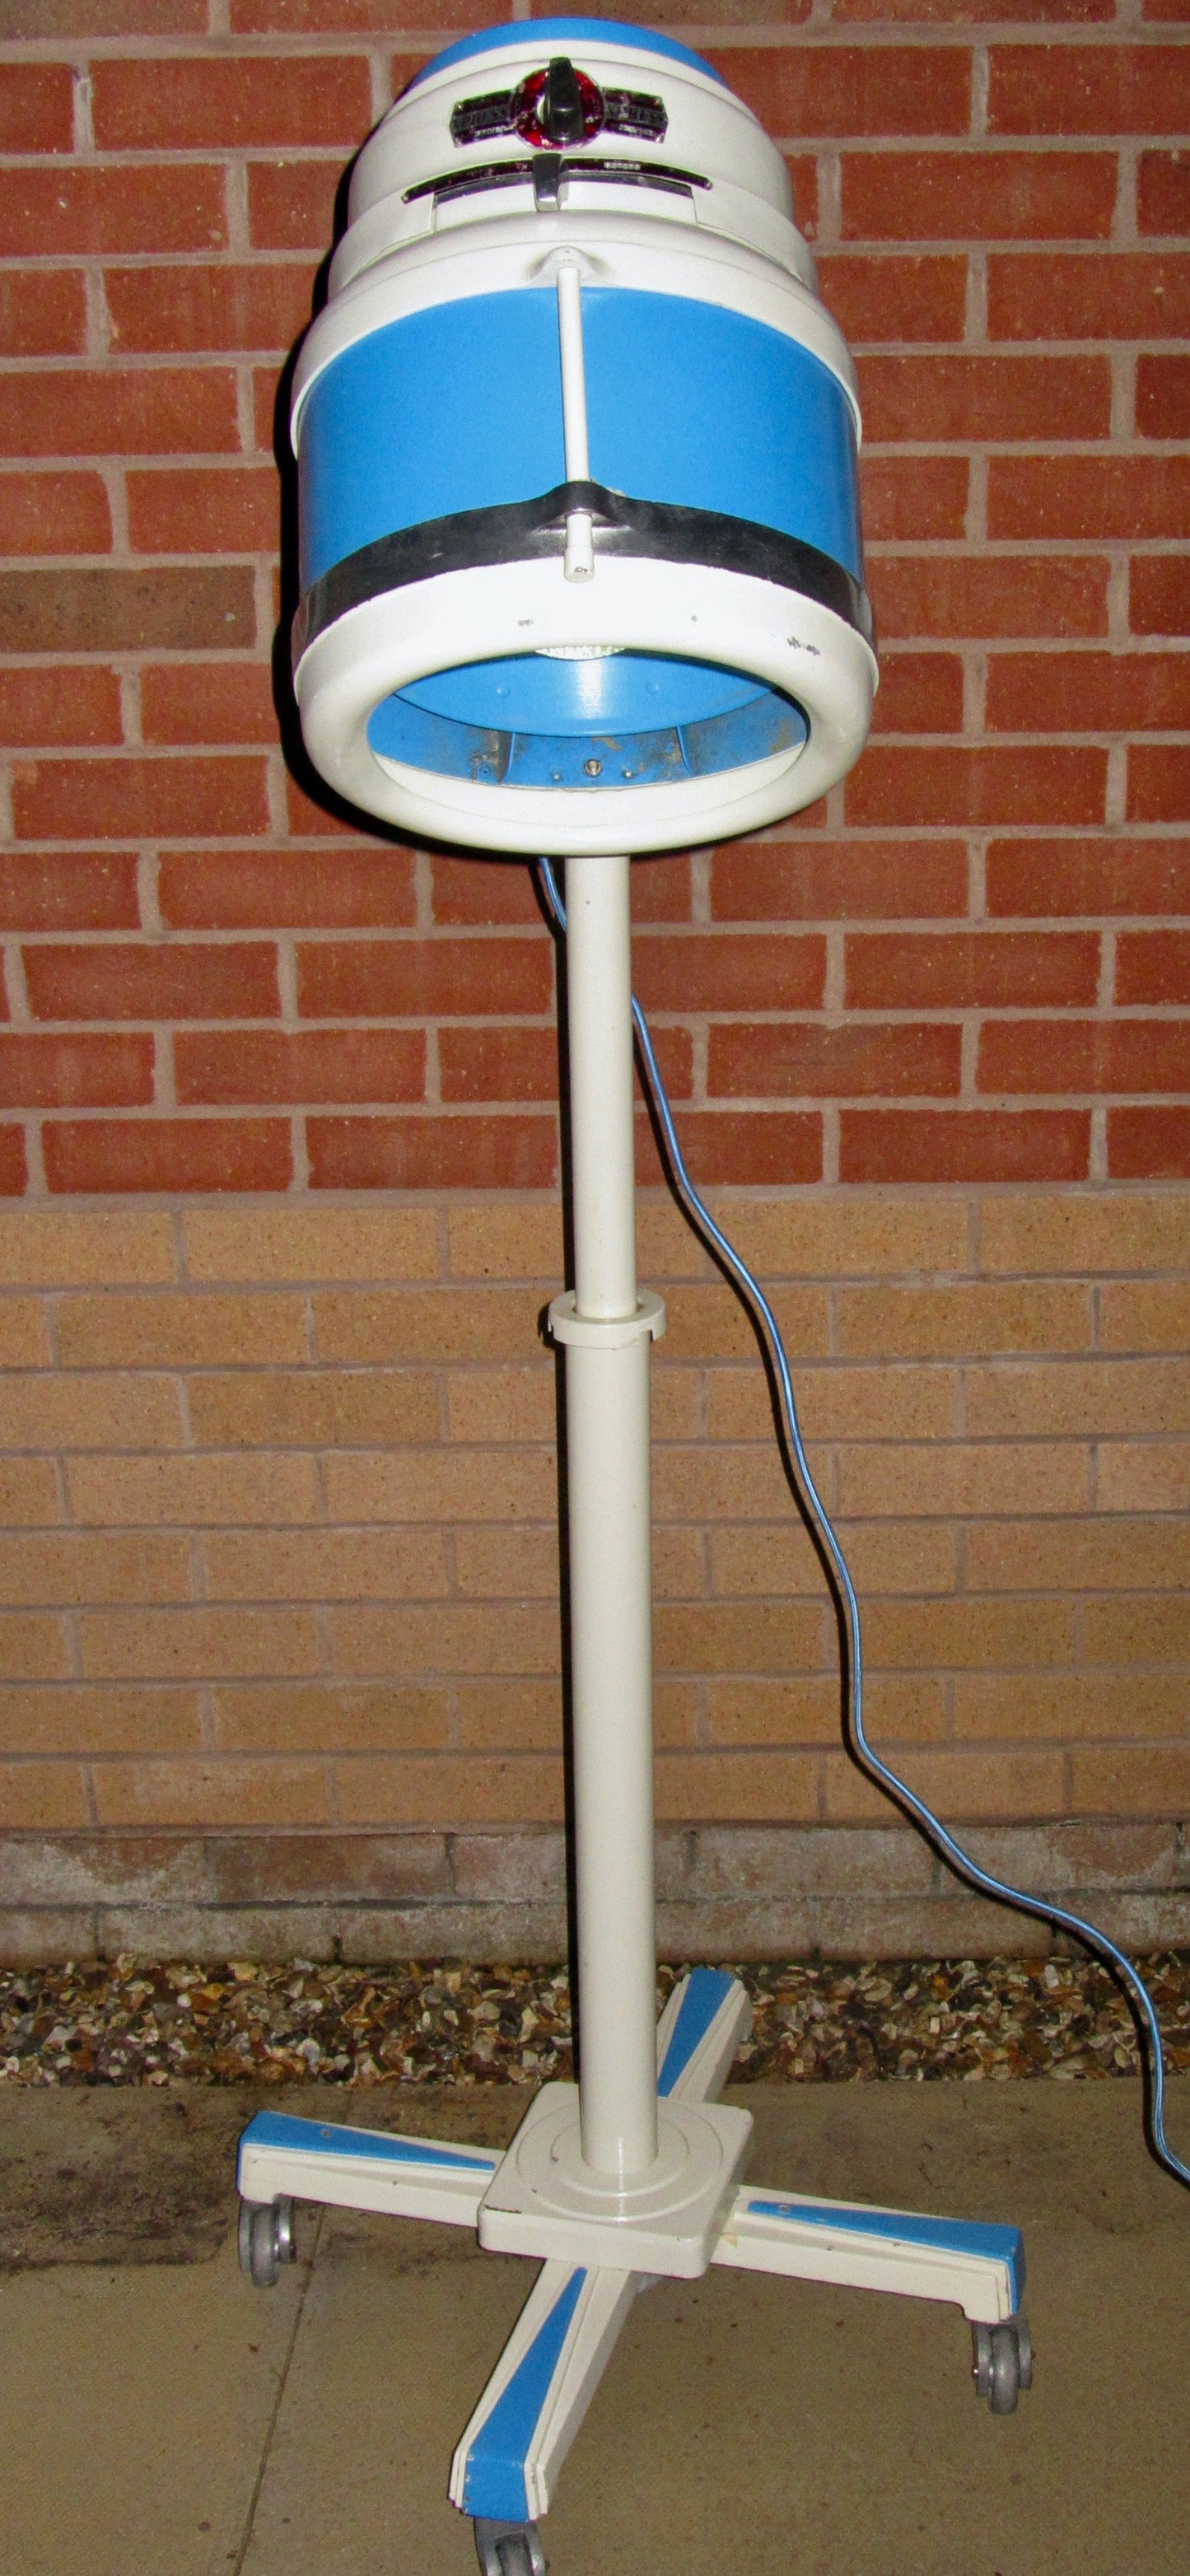 SALE! 1960s Xpress Hairdresser Salon Hairdryer Converted To A Floor Standing Lamp